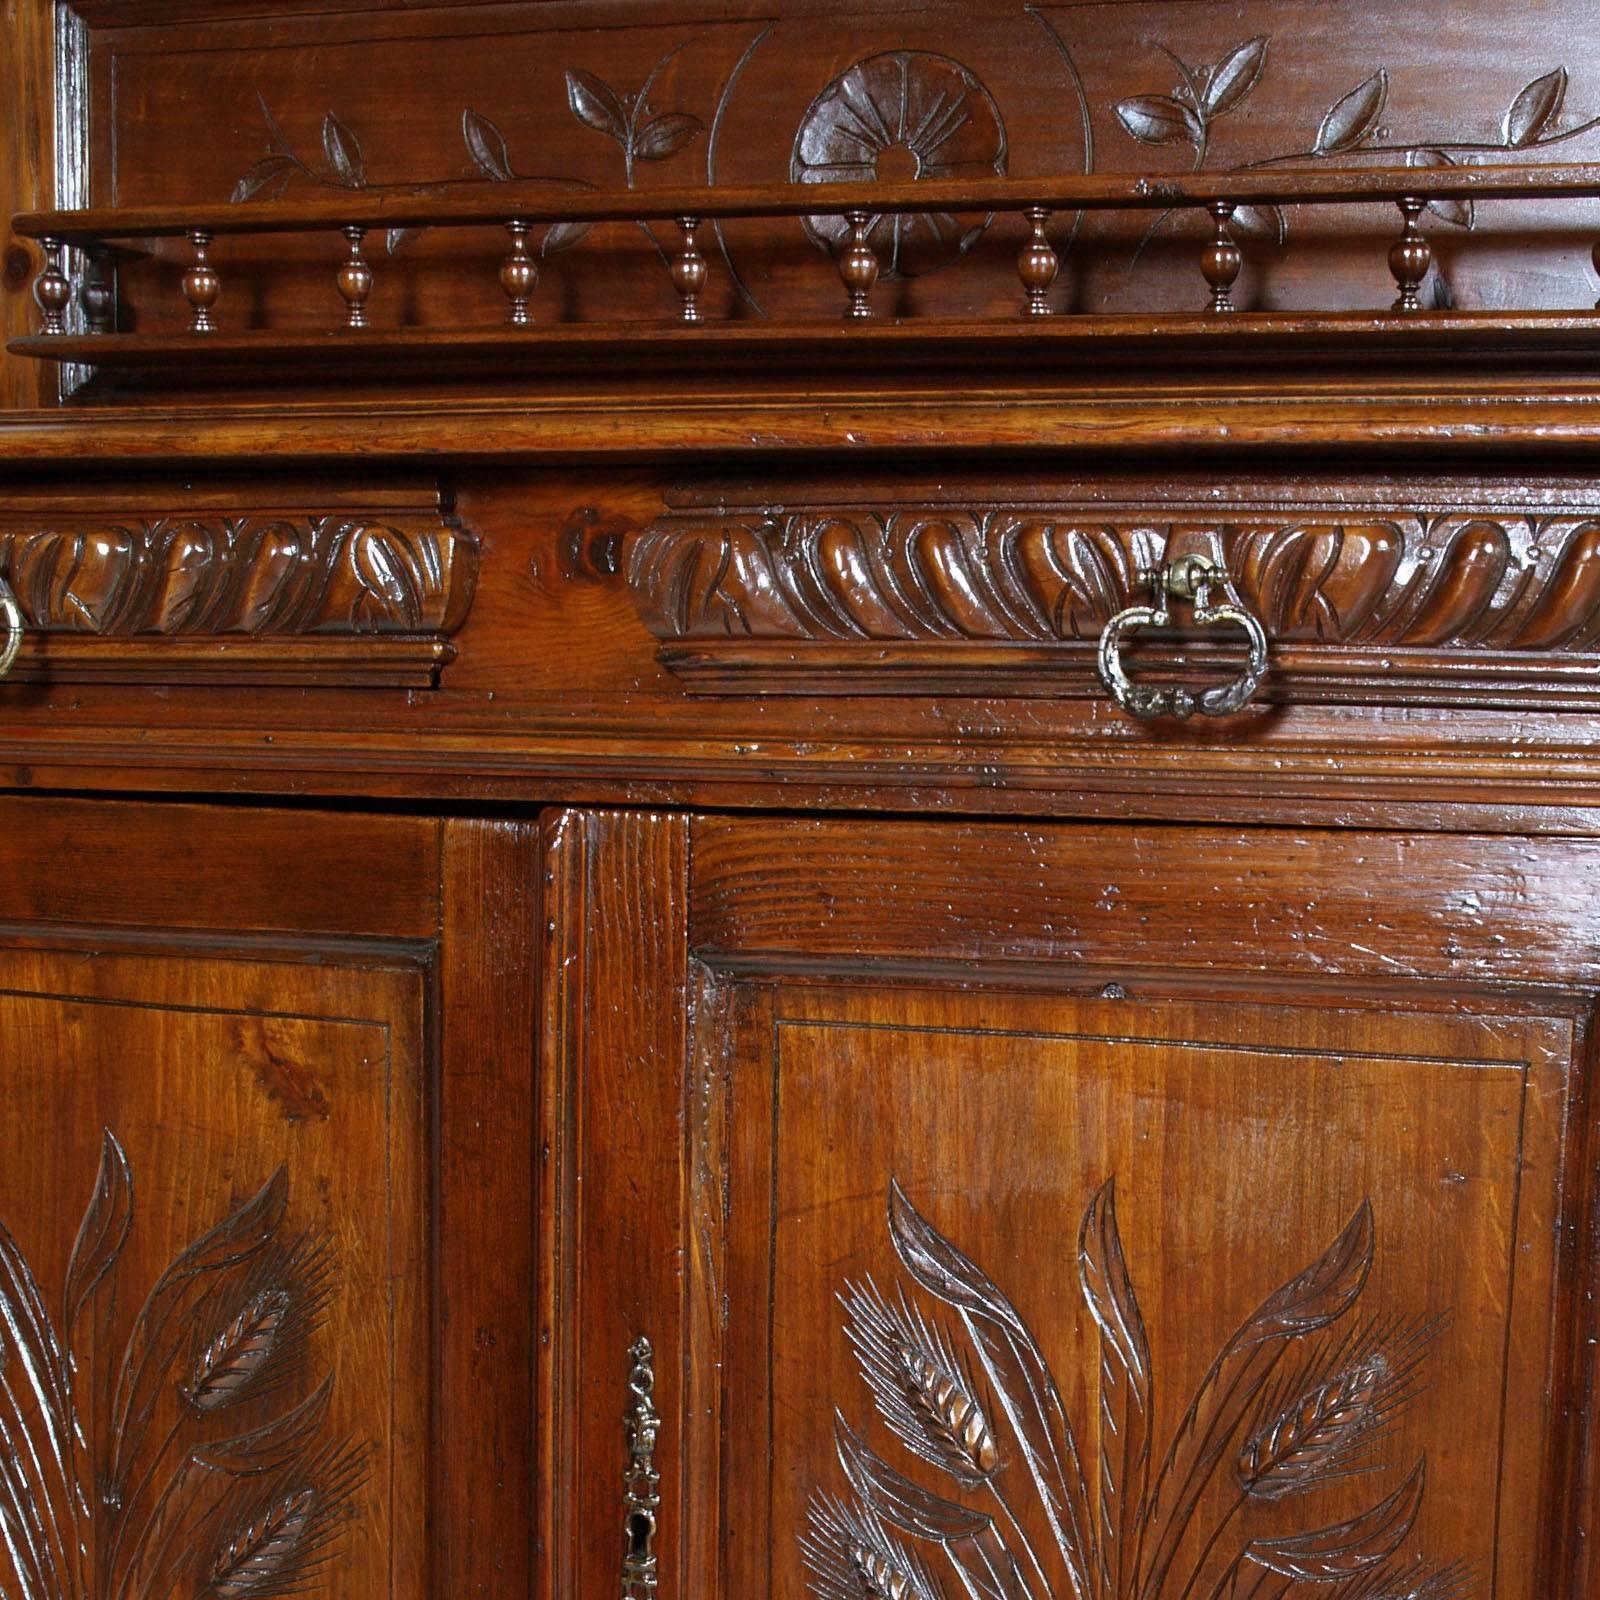 19th Century Art Nouveau Provencal Hand-Carved Solid Wood Sideboard Restored and Wax Polished For Sale